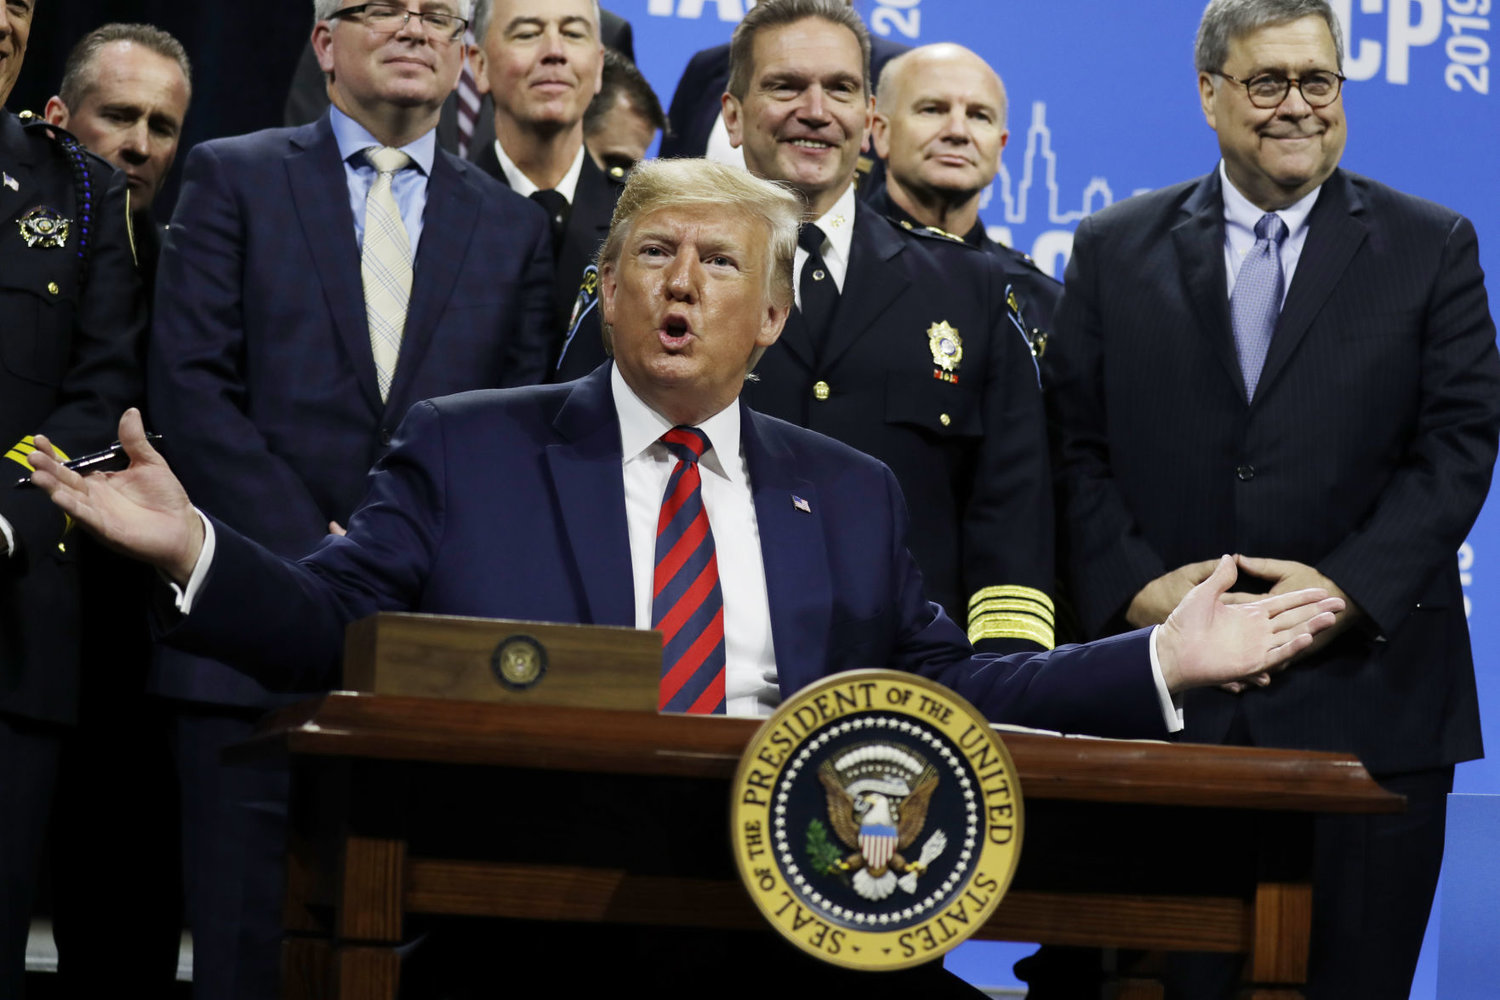 President Donald Trump signs an executive order during the International Association of Chiefs of Police Annual Conference and Exposition, at the McCormick Place Convention Center on Monday, Oct. 28, 2019, in Chicago.